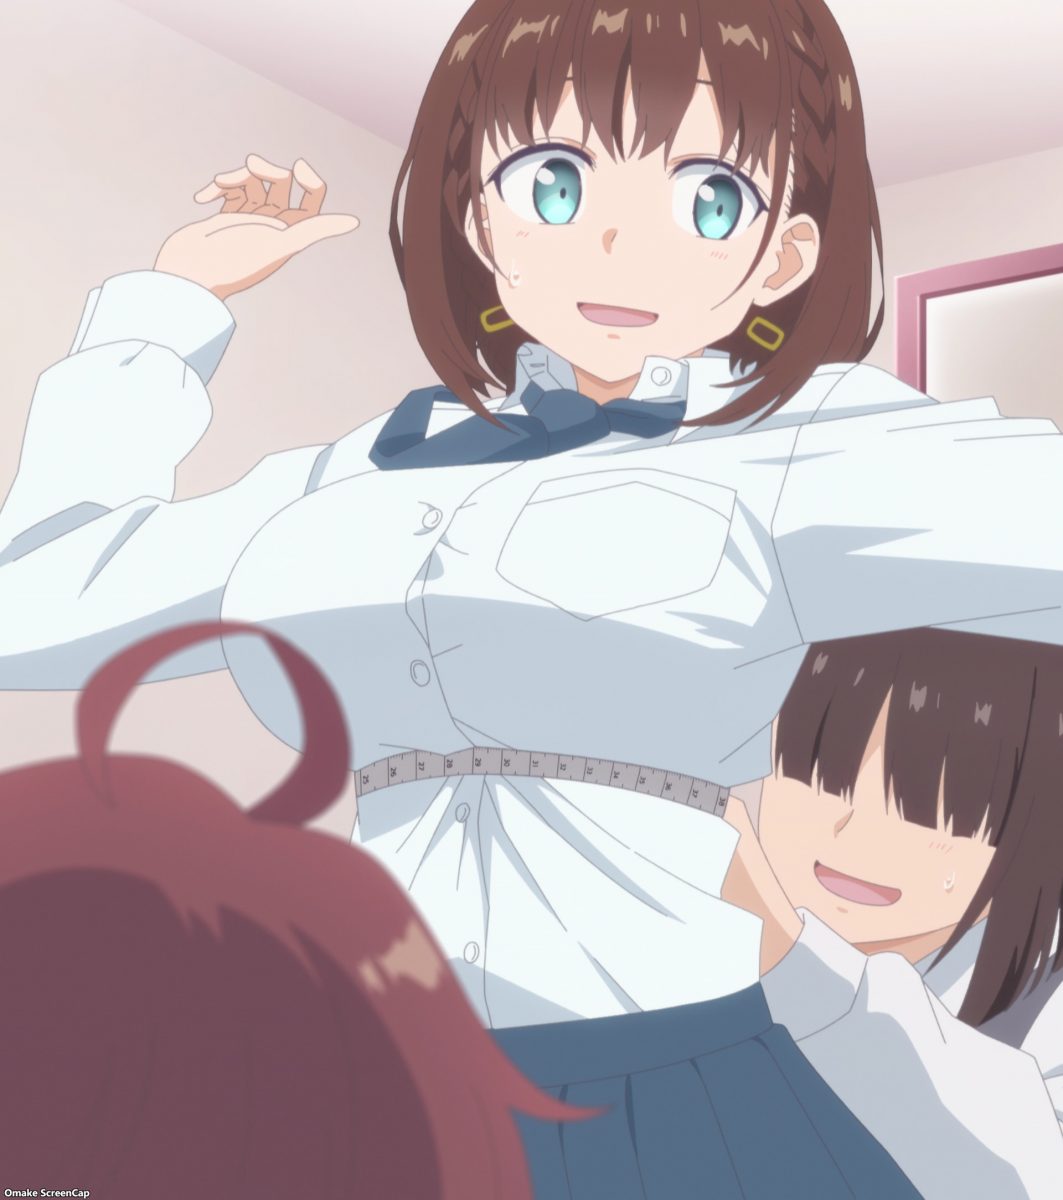 Tawawa on Monday Two, Ep 11: Aichan Busting Up and Out